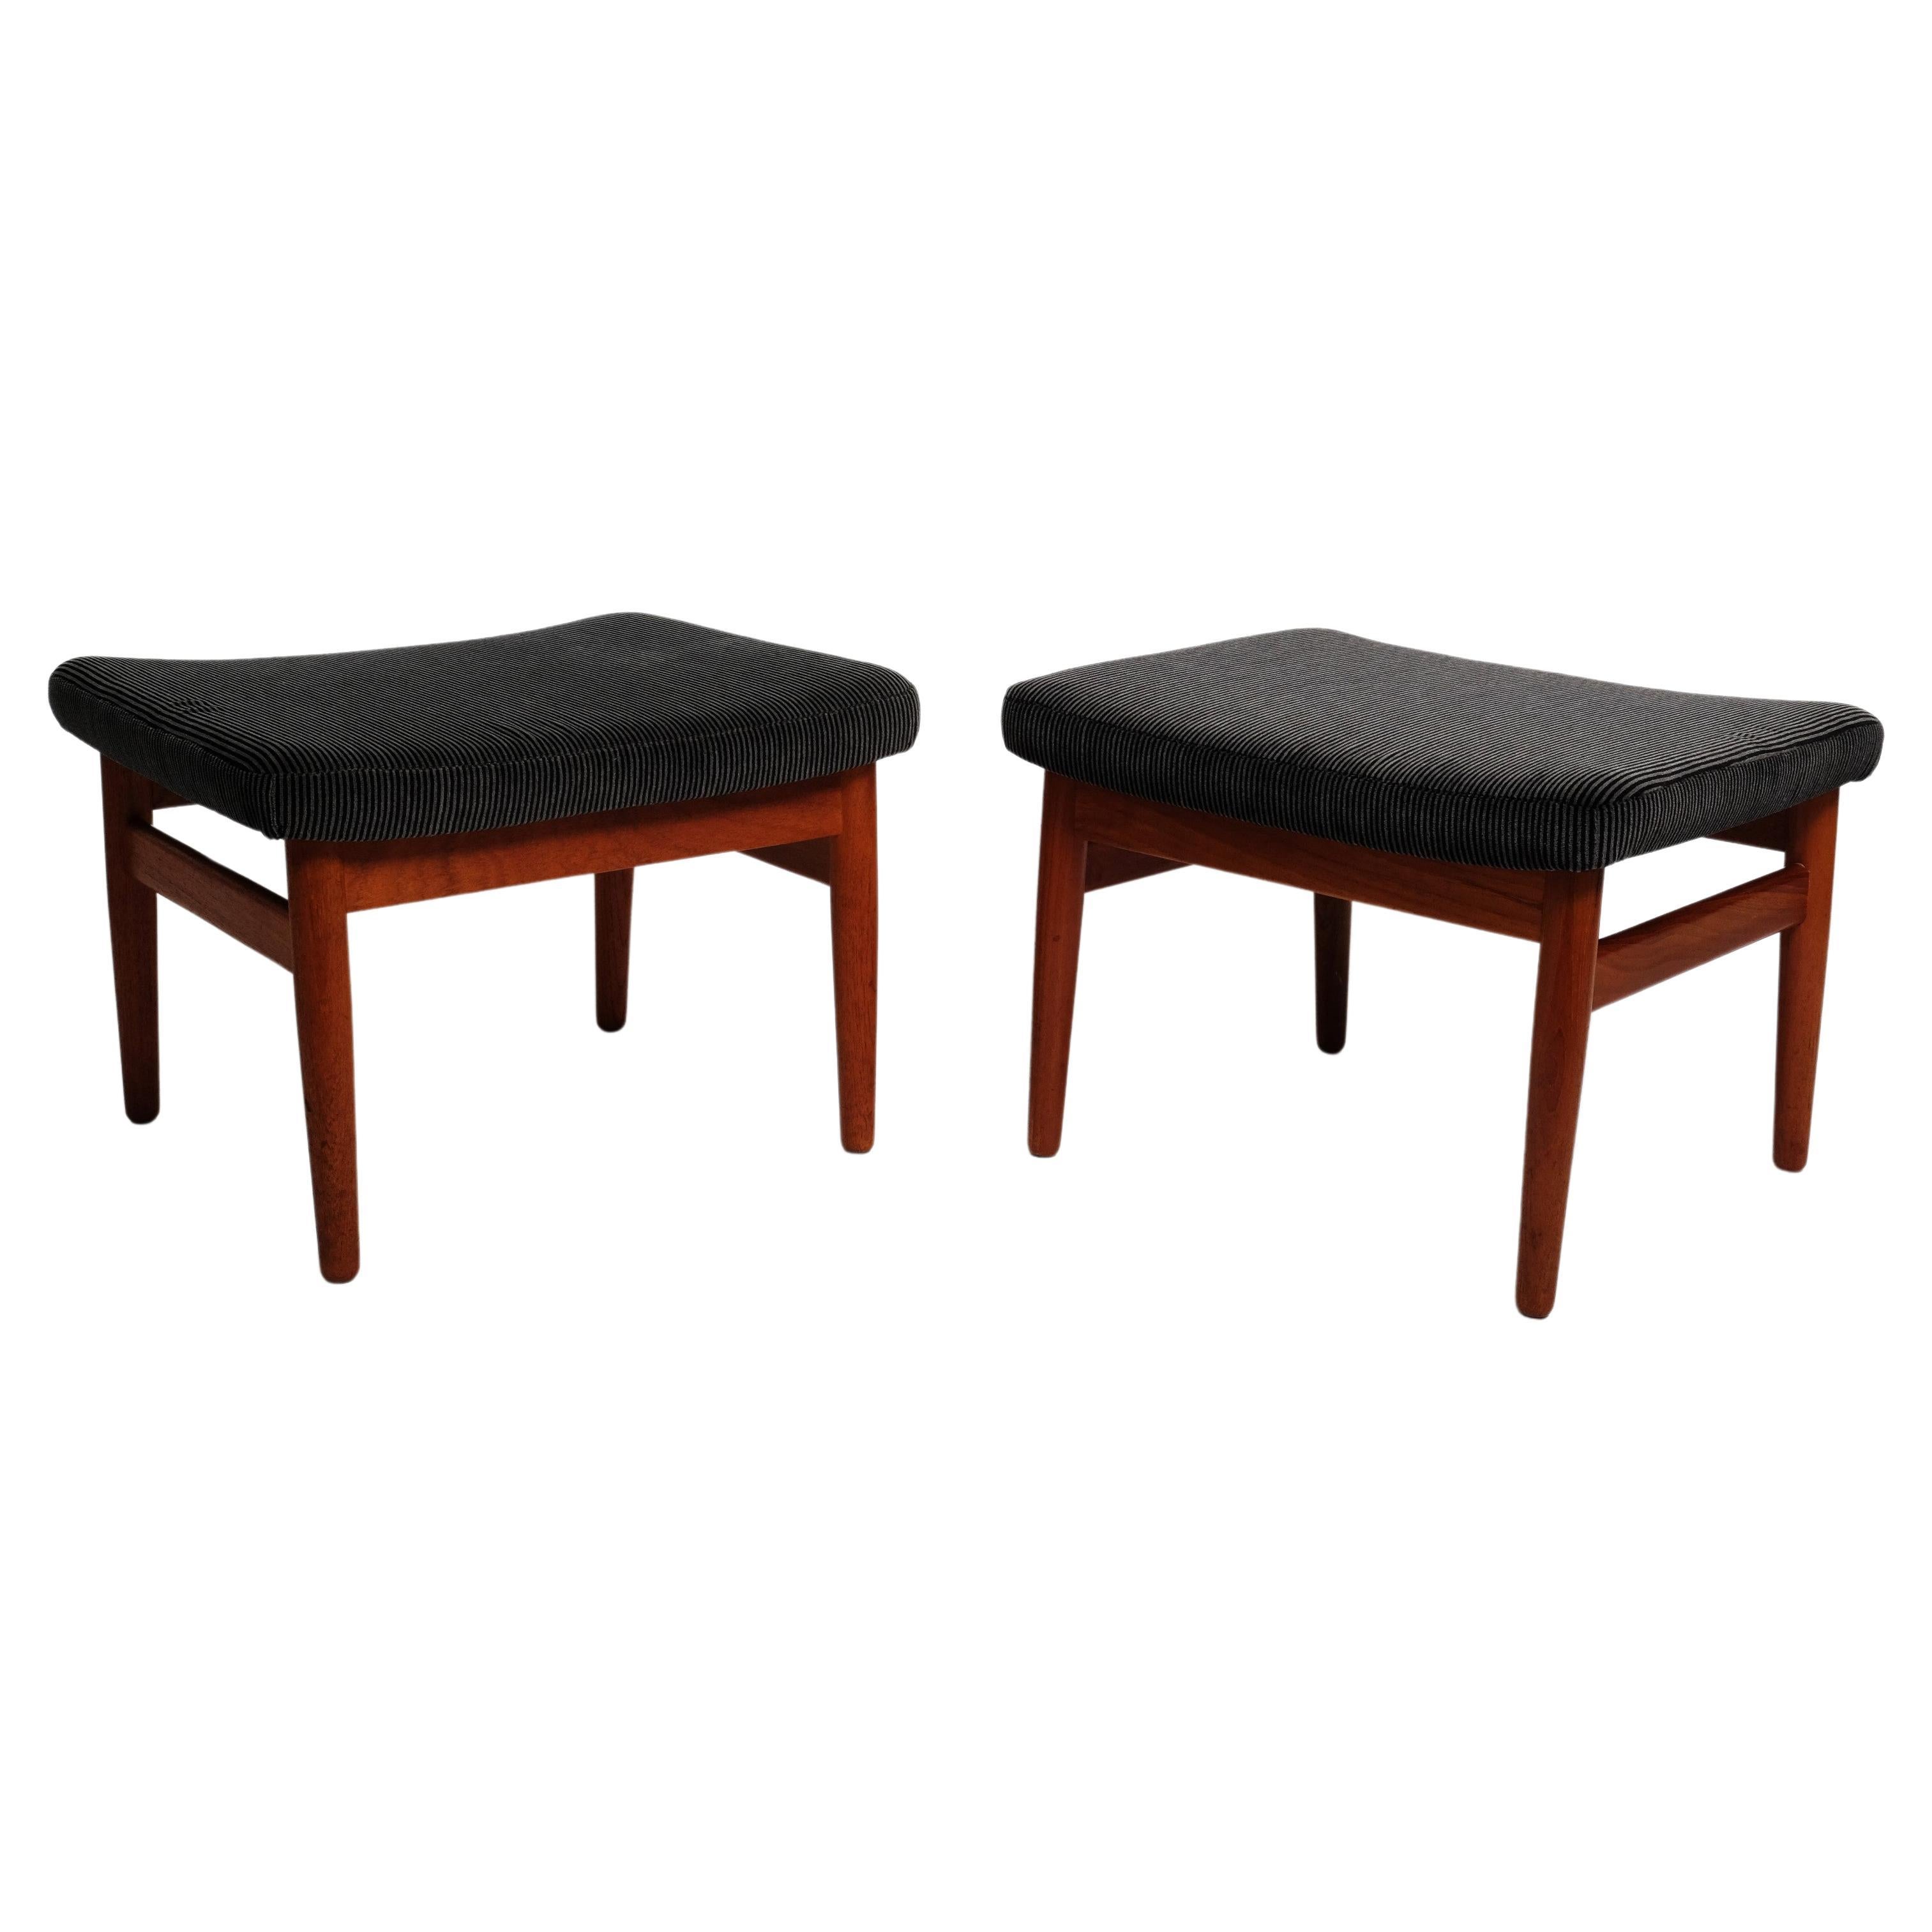 Two Mid-Century Stools by Arne Vodder FD164 Ottomans France & Son, Denmark 1960s